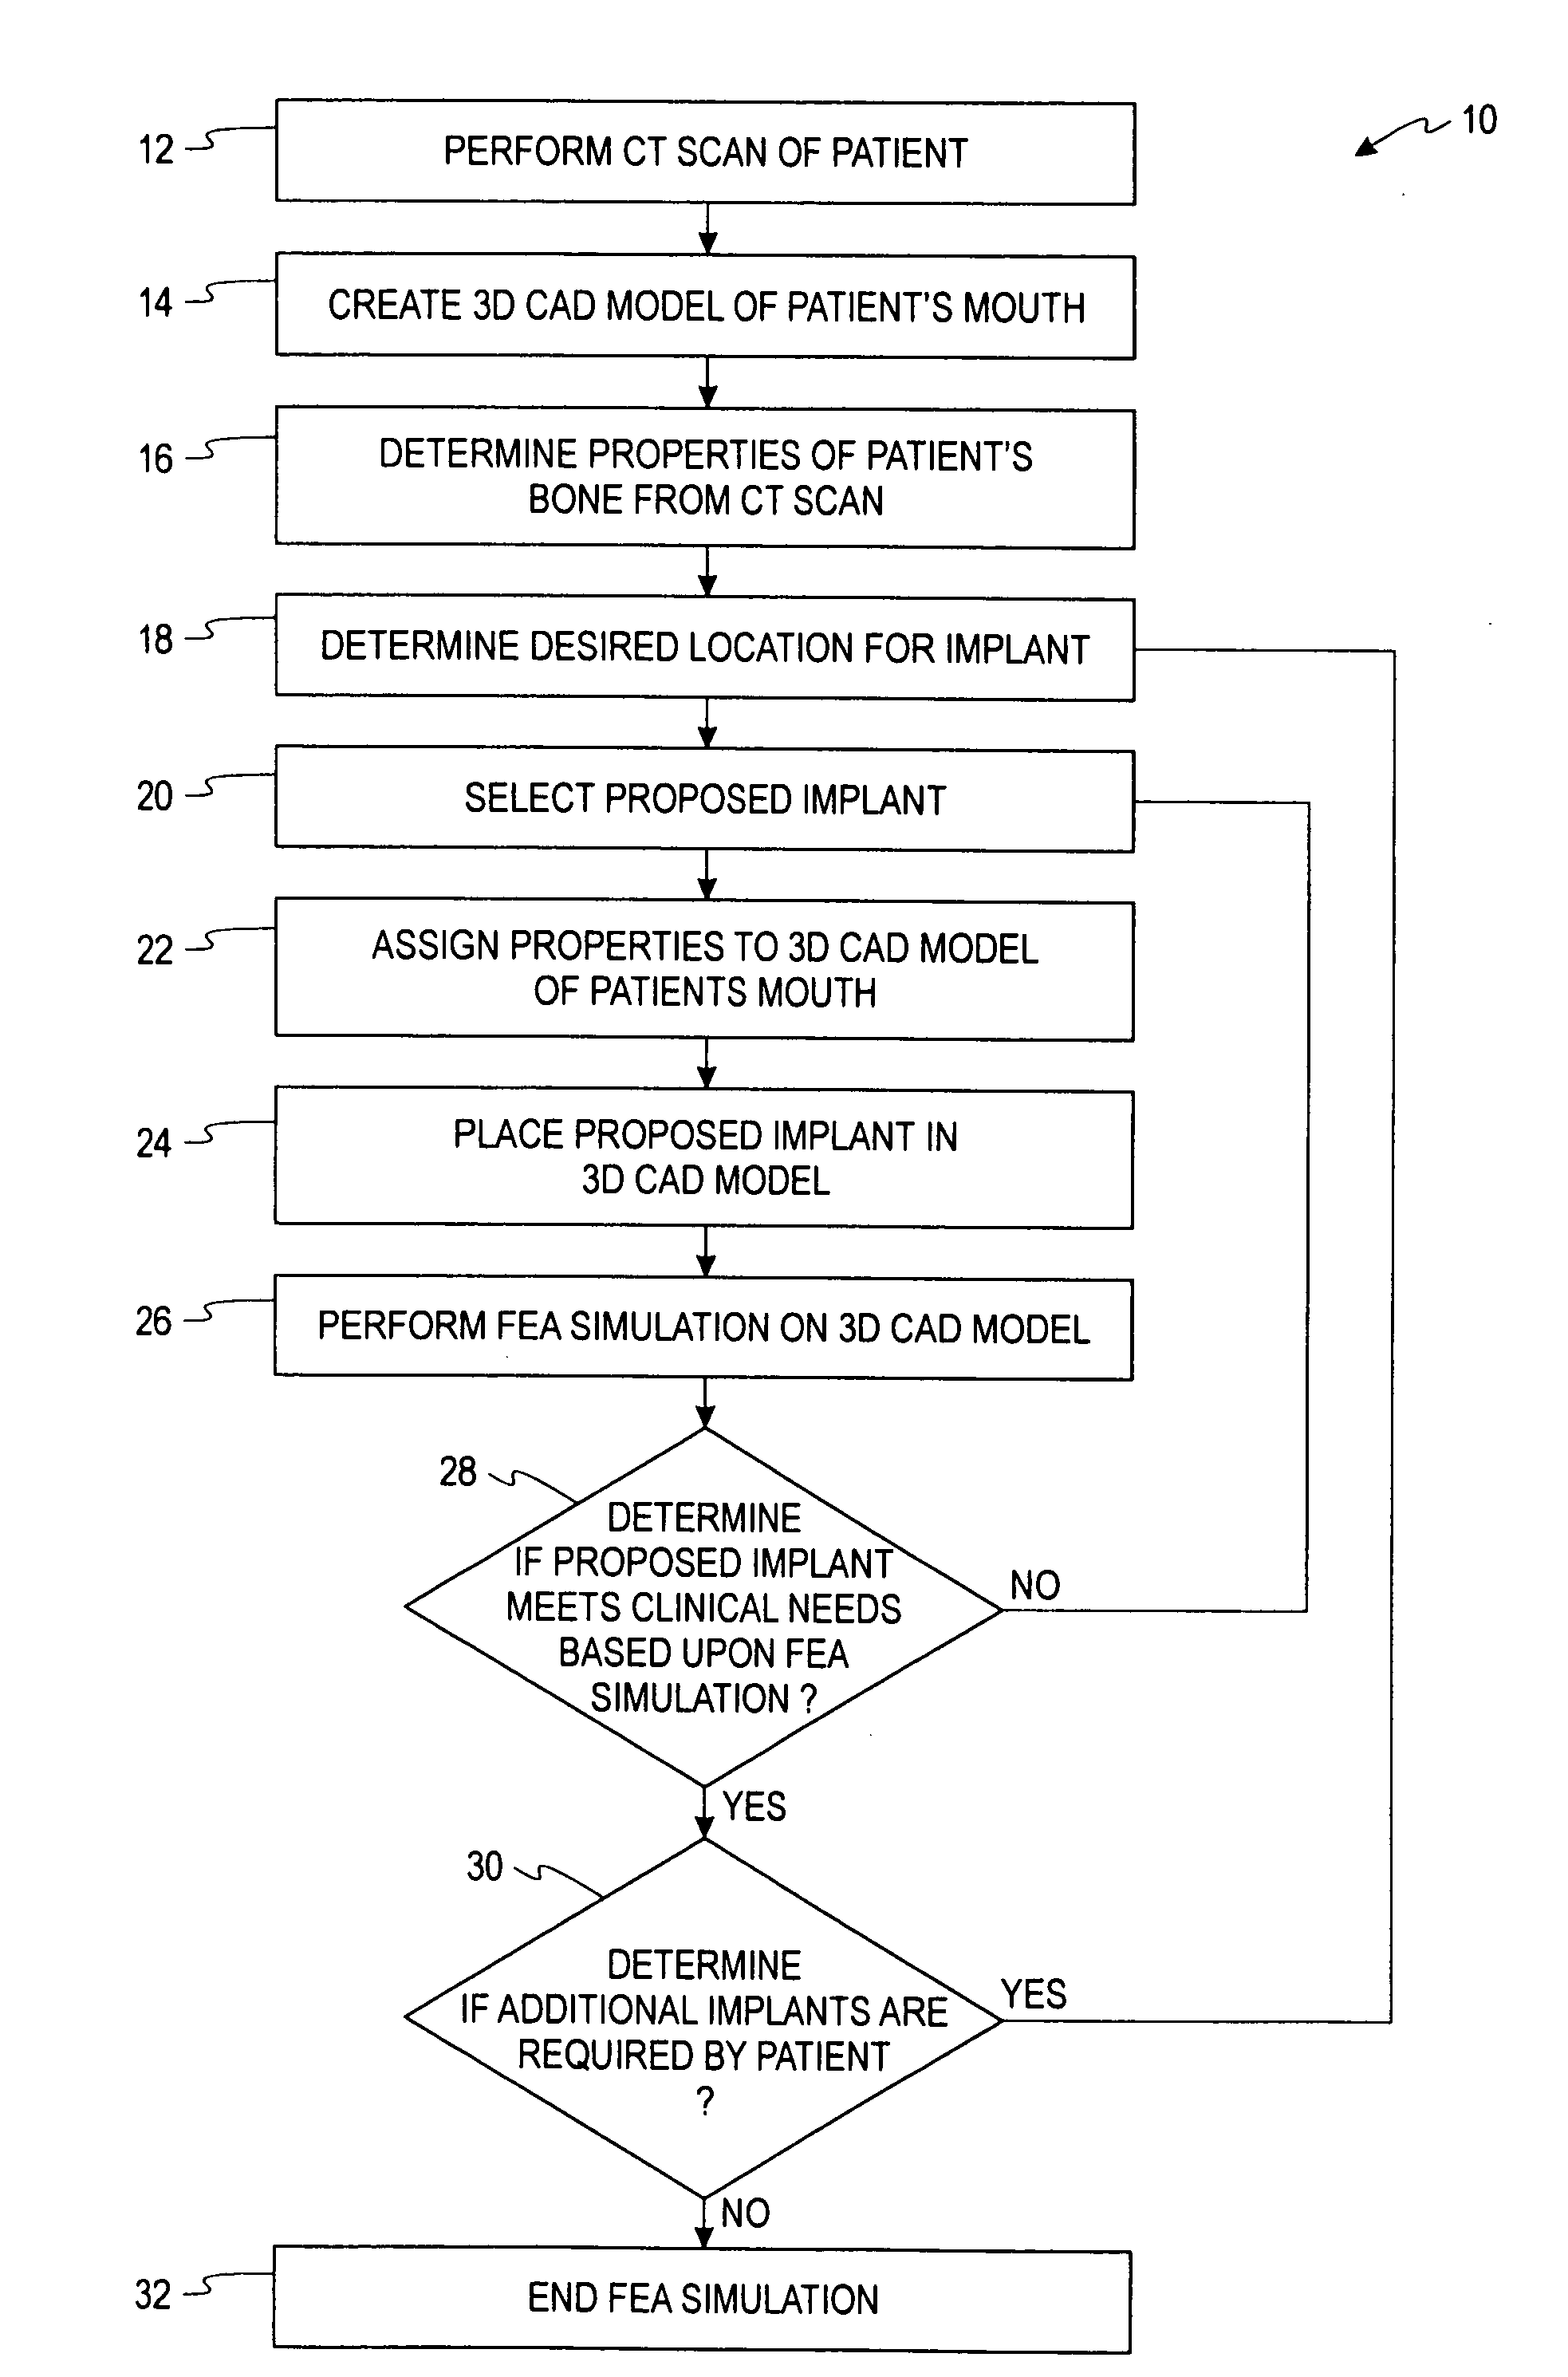 Method for selecting implant components